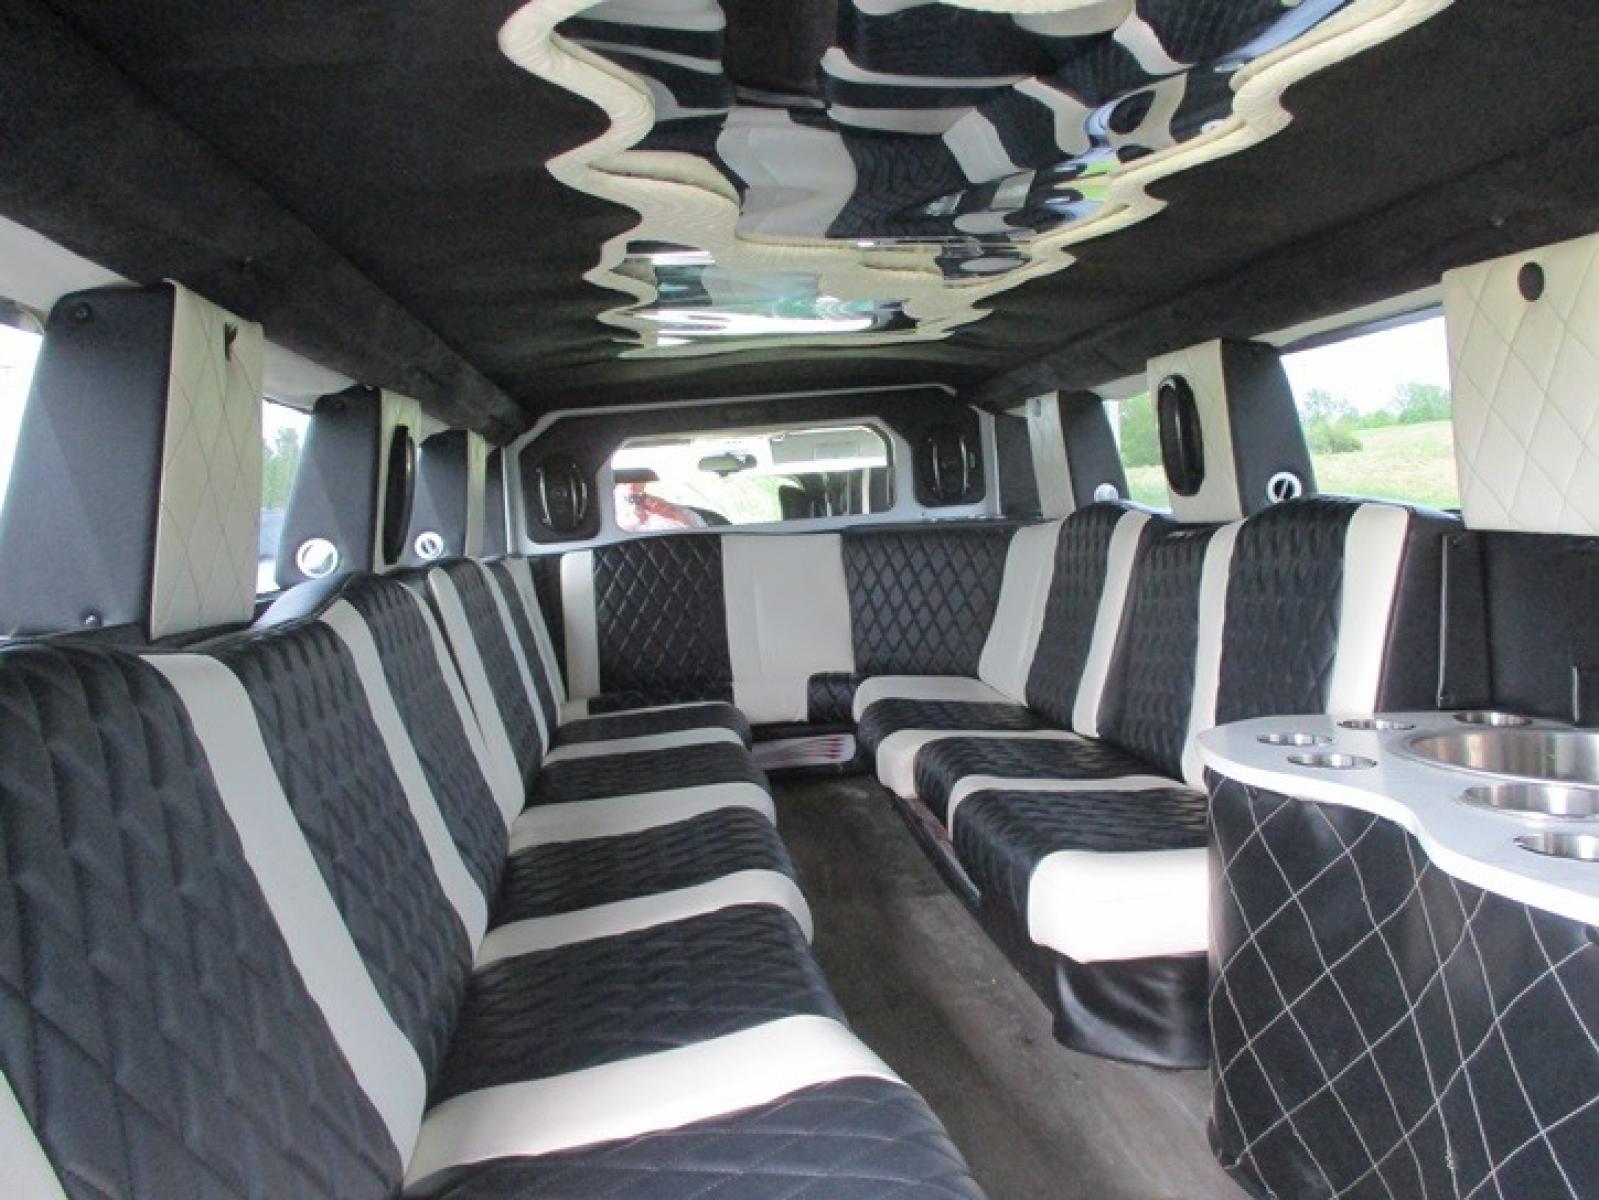 2005 White /White/Black Hummer H2 , located at 1725 US-68 N, Bellefontaine, OH, 43311, (937) 592-5466, 40.387783, -83.752388 - 2005 Hummer H2 175" SUV VIP Limousine, White w/White/black leather interior, Front/Rear Ait, Flat Screens, AM/FM/CD reconditioned Interior, LOADED - Photo #8